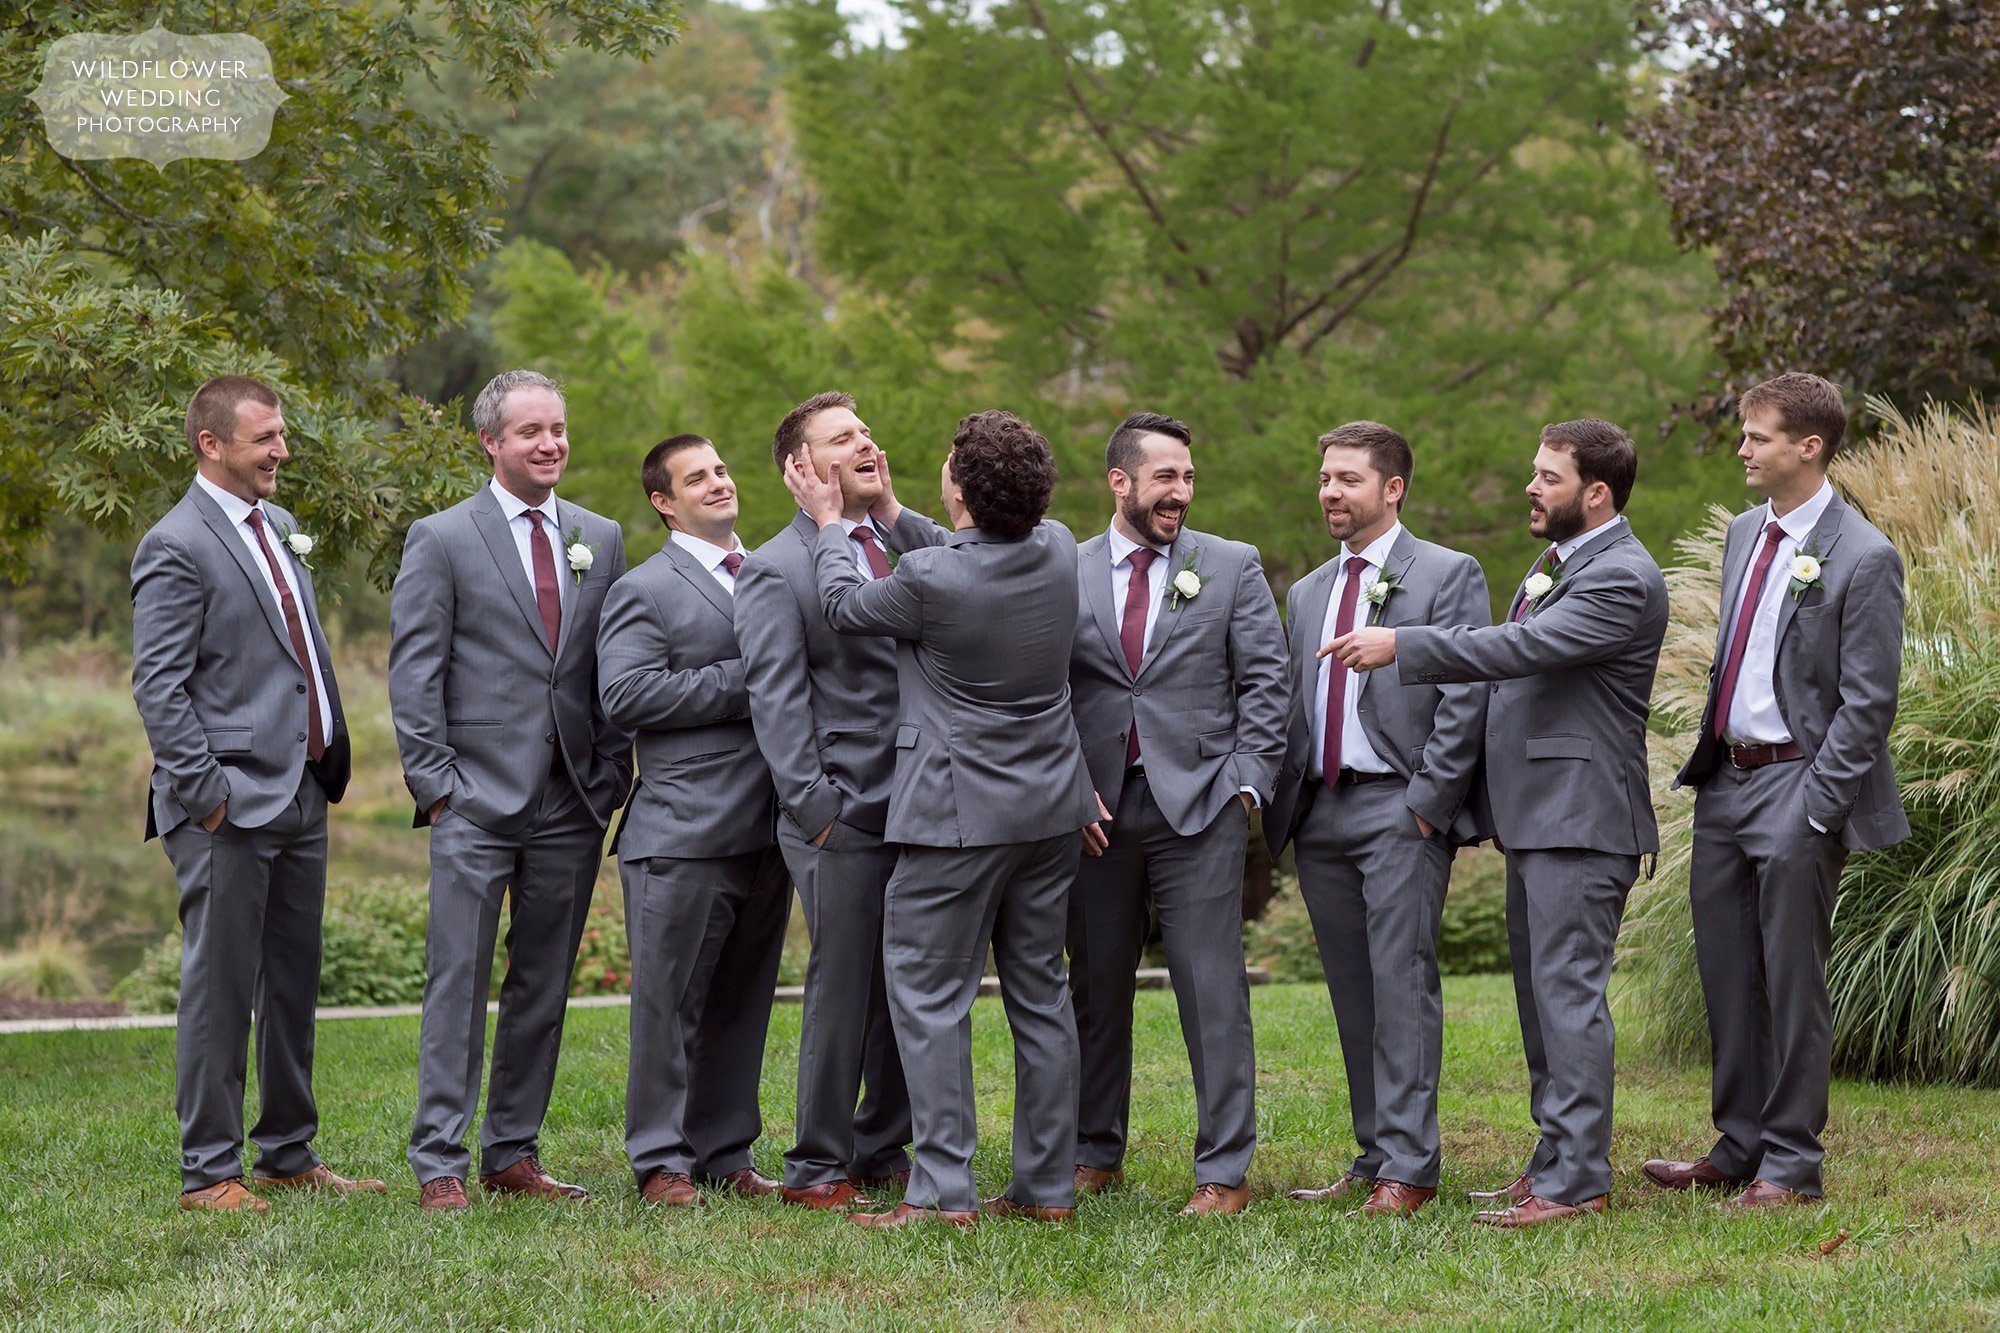 Funny groomsmen photos at the Little Piney Lodge woodsy wedding venue.